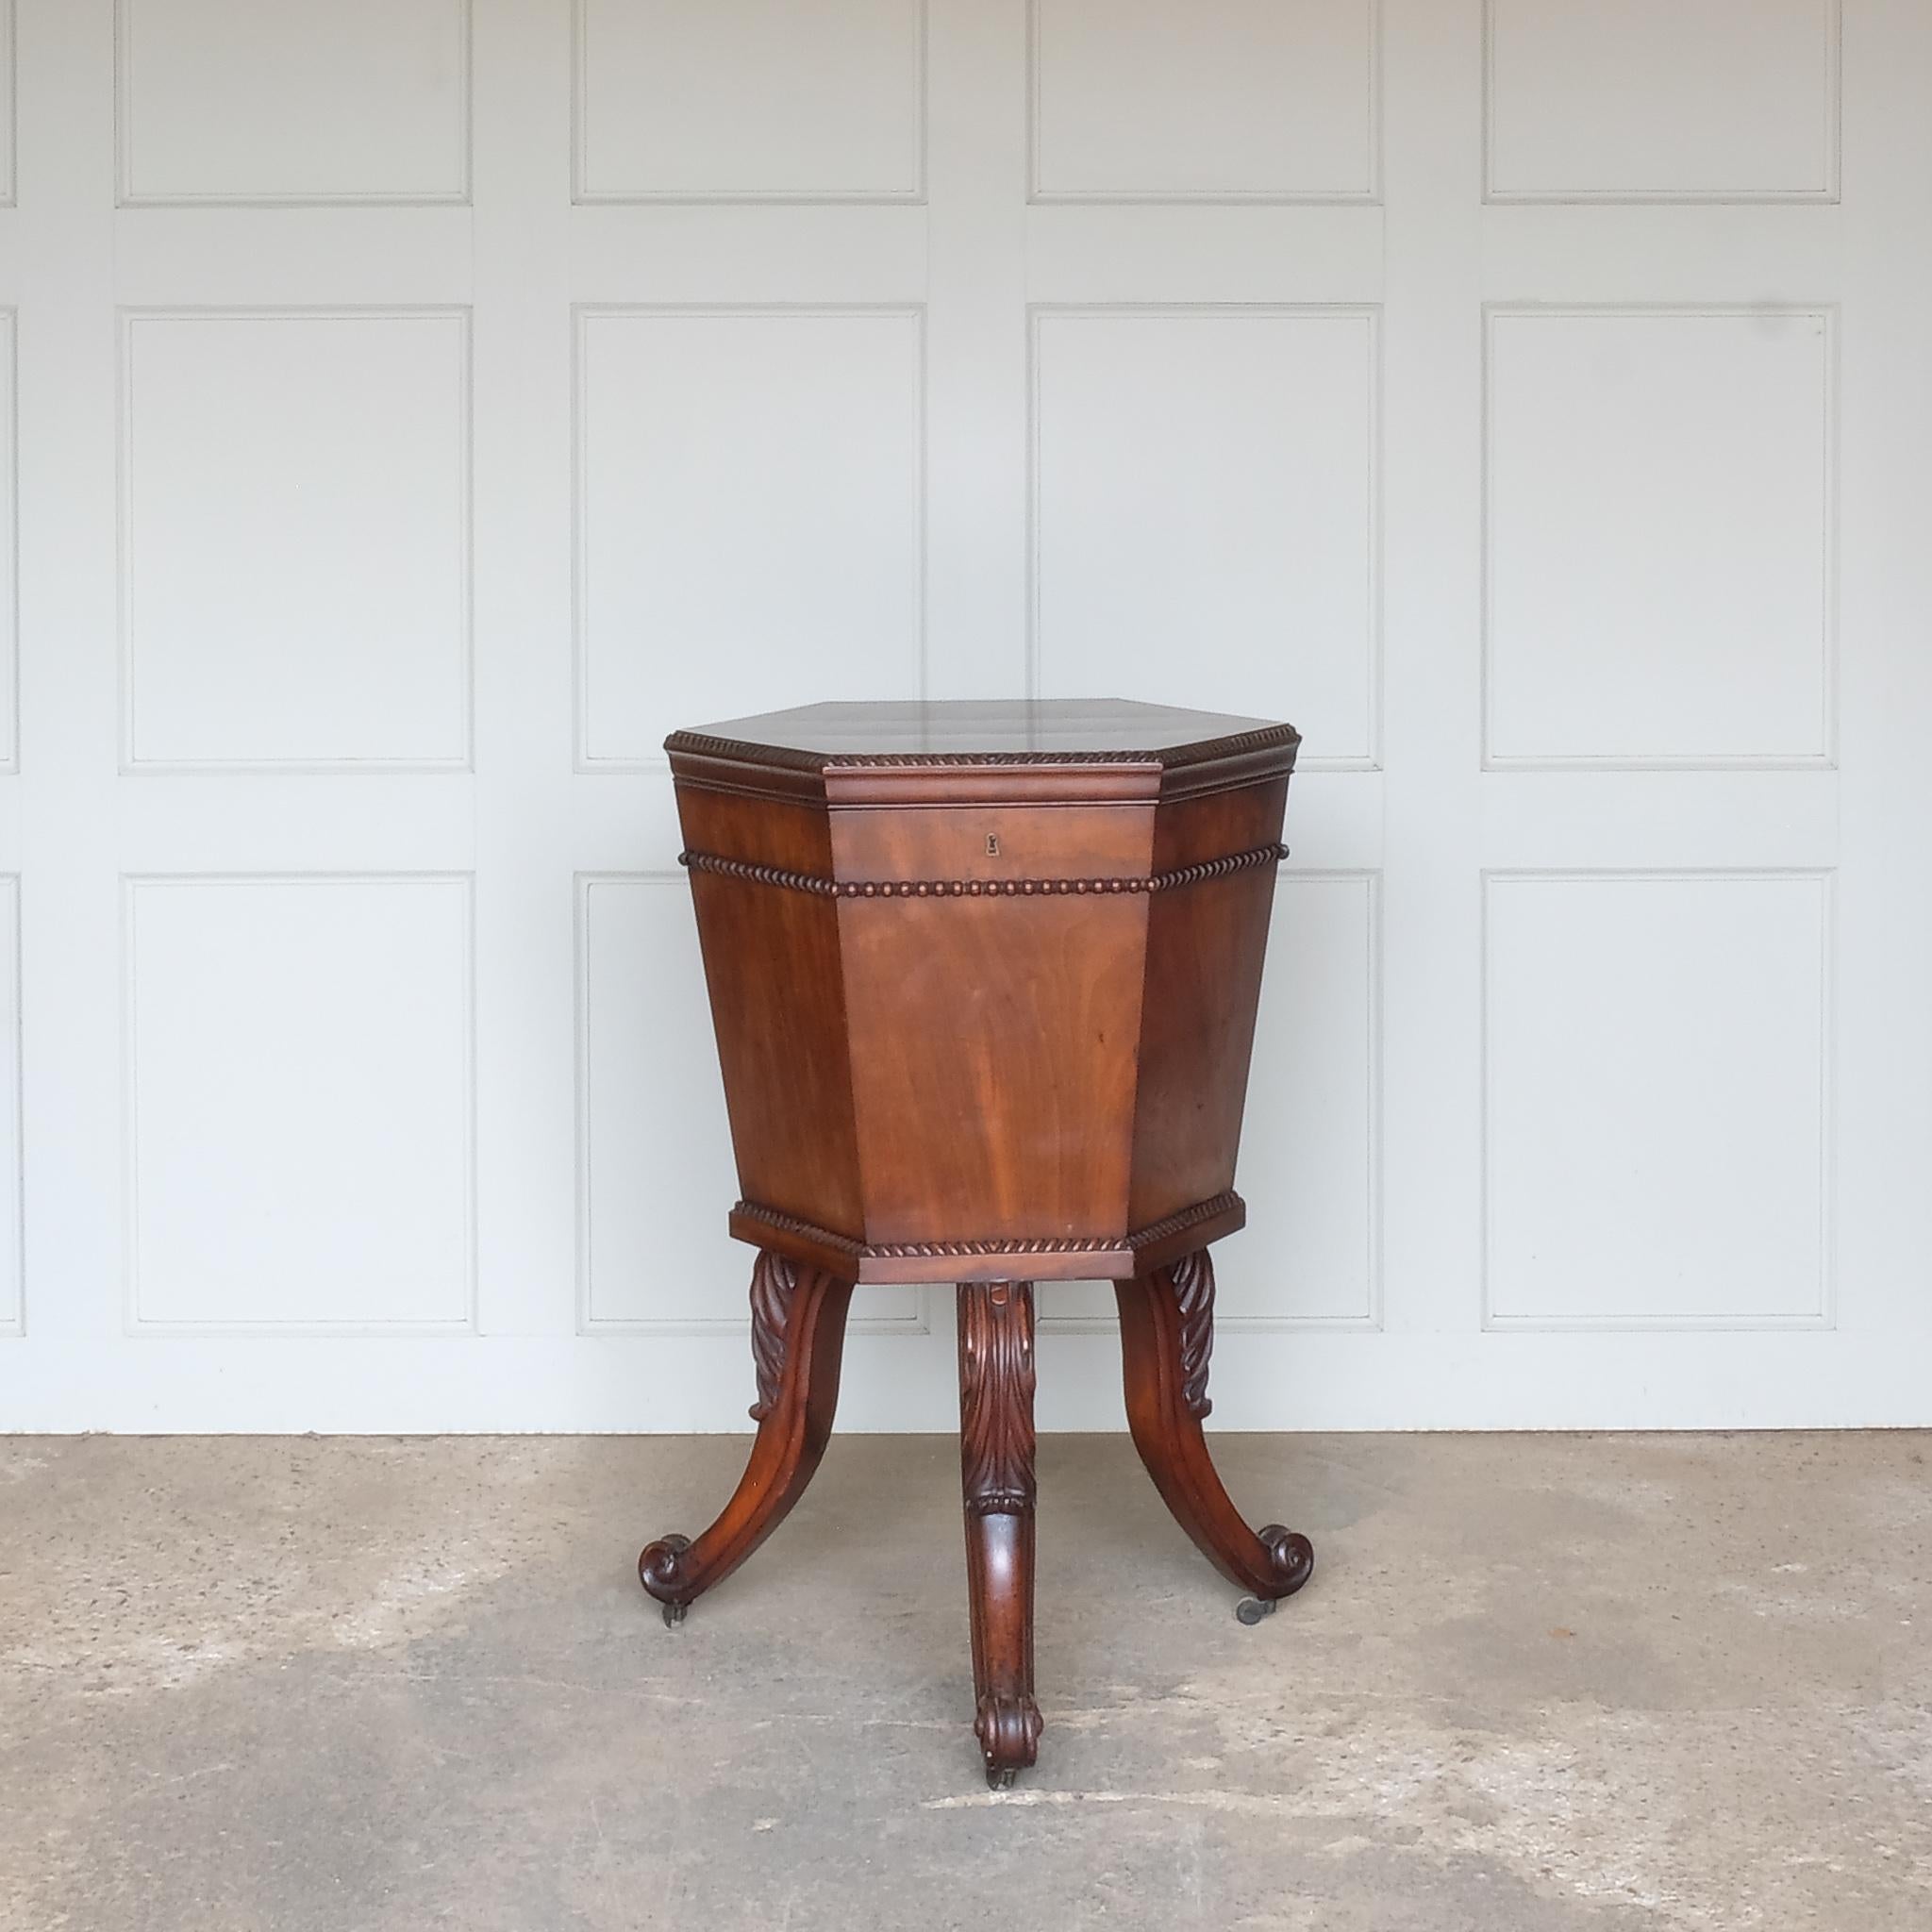 A hexagonal mahogany wine cooler, 19th century, with a hinged moulded top, enclosing a tin-lined interior with divisions for six bottles, on elegantly detailed cabriole legs with scrolls at the feet and a drainage tap underneath, in very good